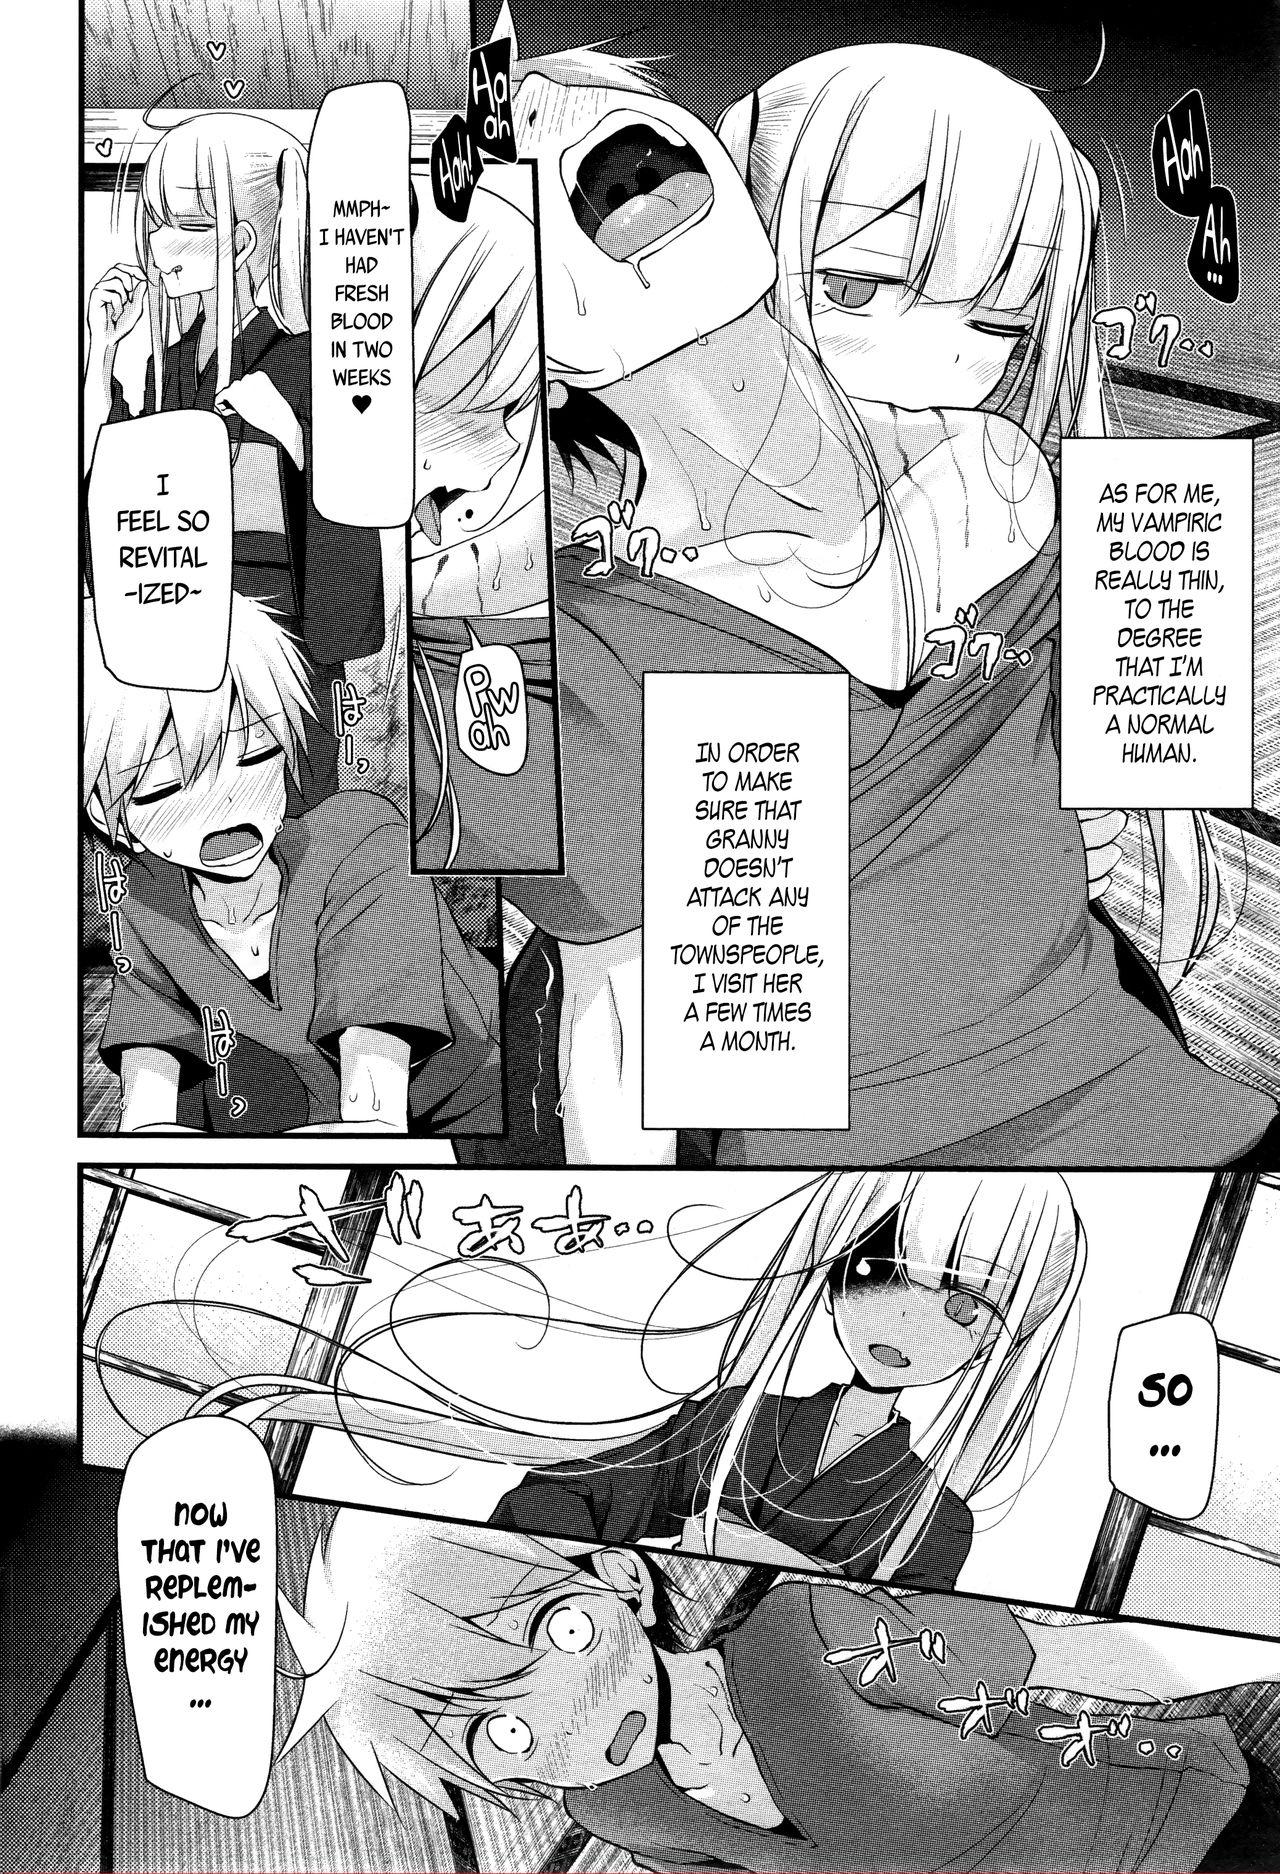 Moaning Natsu no Omohide | Memories of Summer Cheat - Page 4